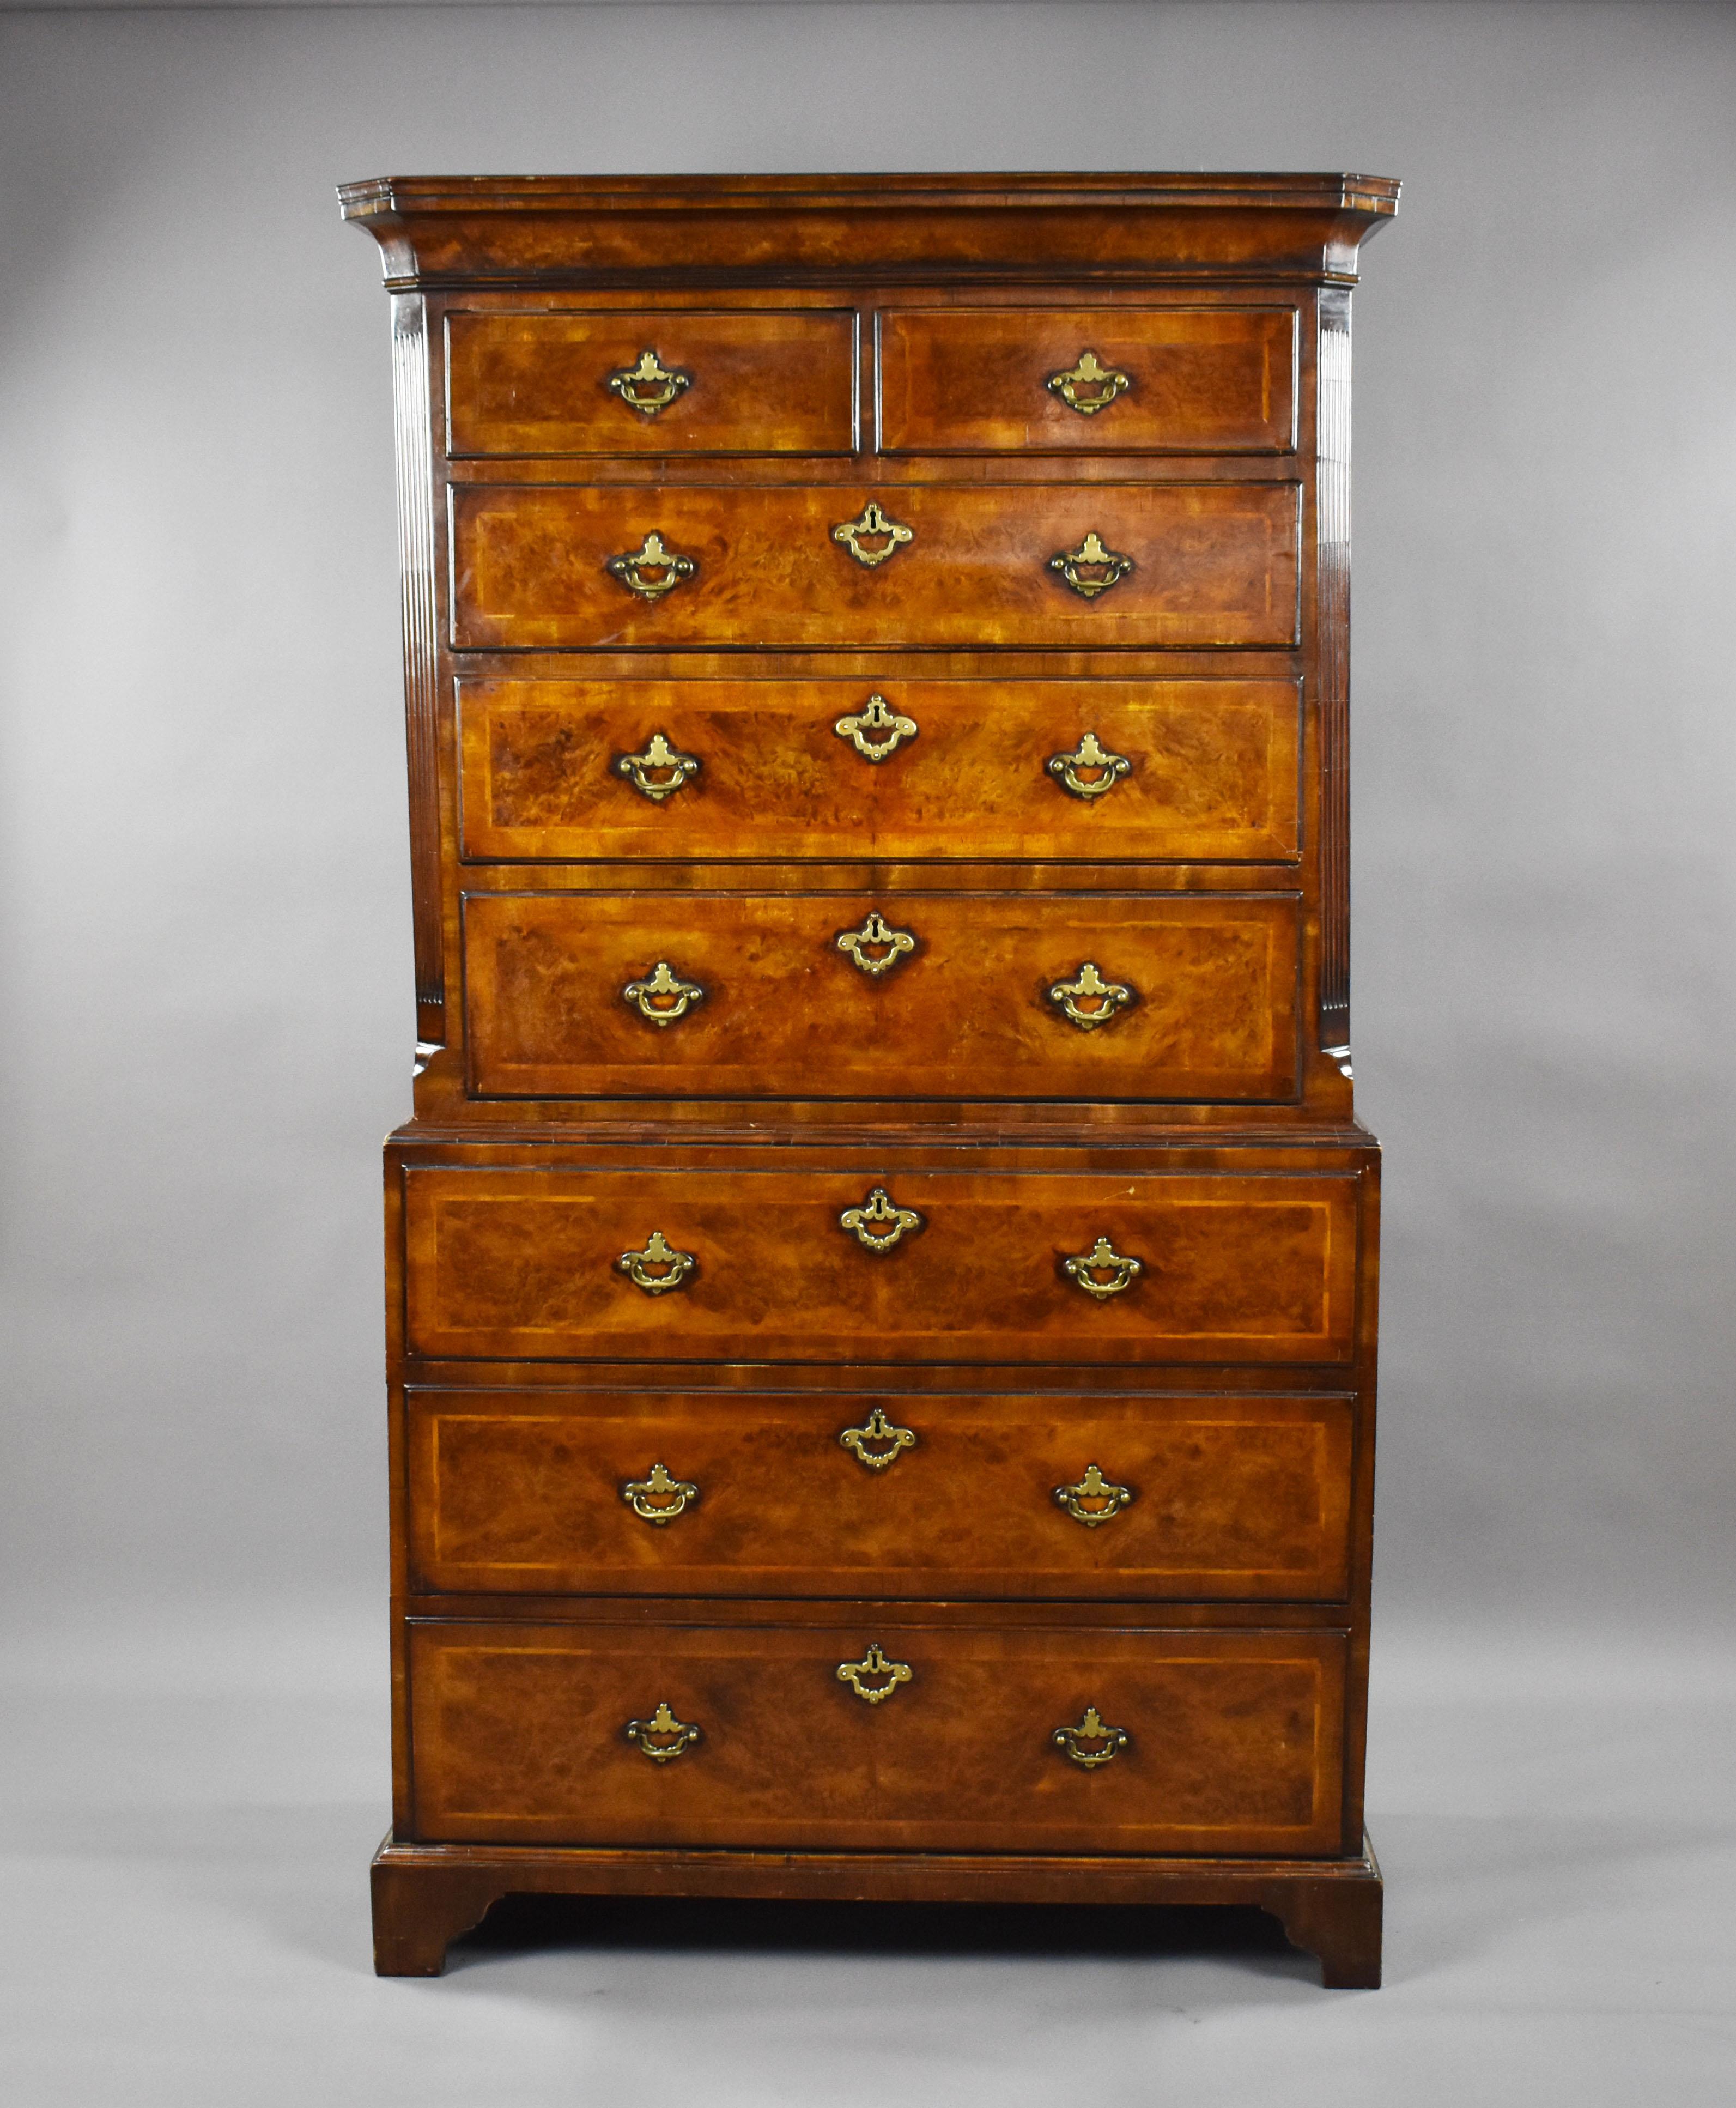 For sale is a good quality George II Burr walnut chest on chest, having a flared cornice above an arrange of five drawers in the top, each with herringbone inlay and banded edges, flanked by canted corners. The bottom chest is complete with a